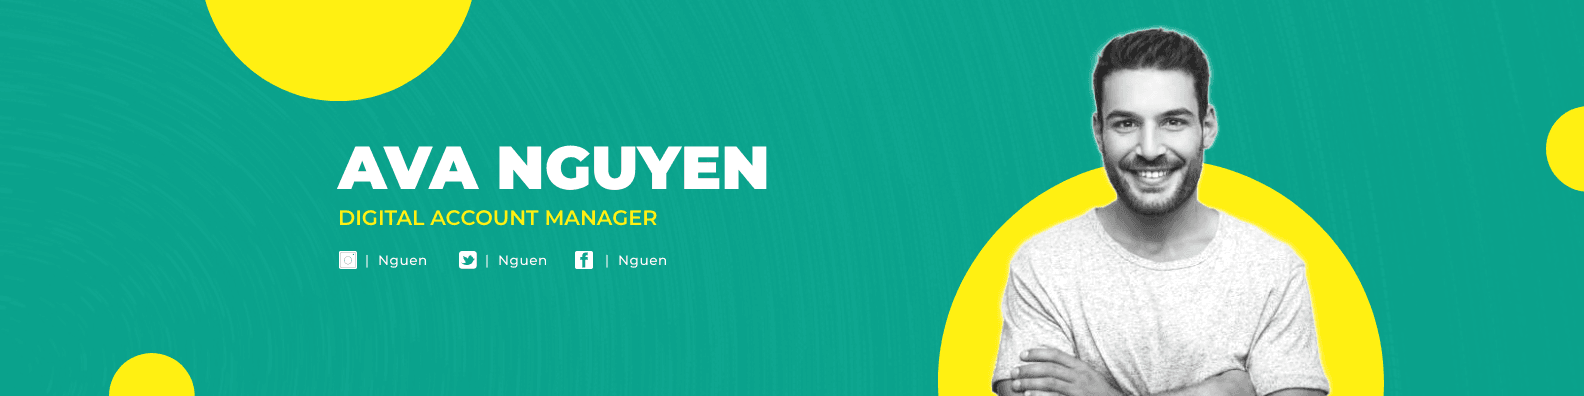 green-and-yellow-background-digital-account-manager-linkedin-banner-template-thumbnail-img